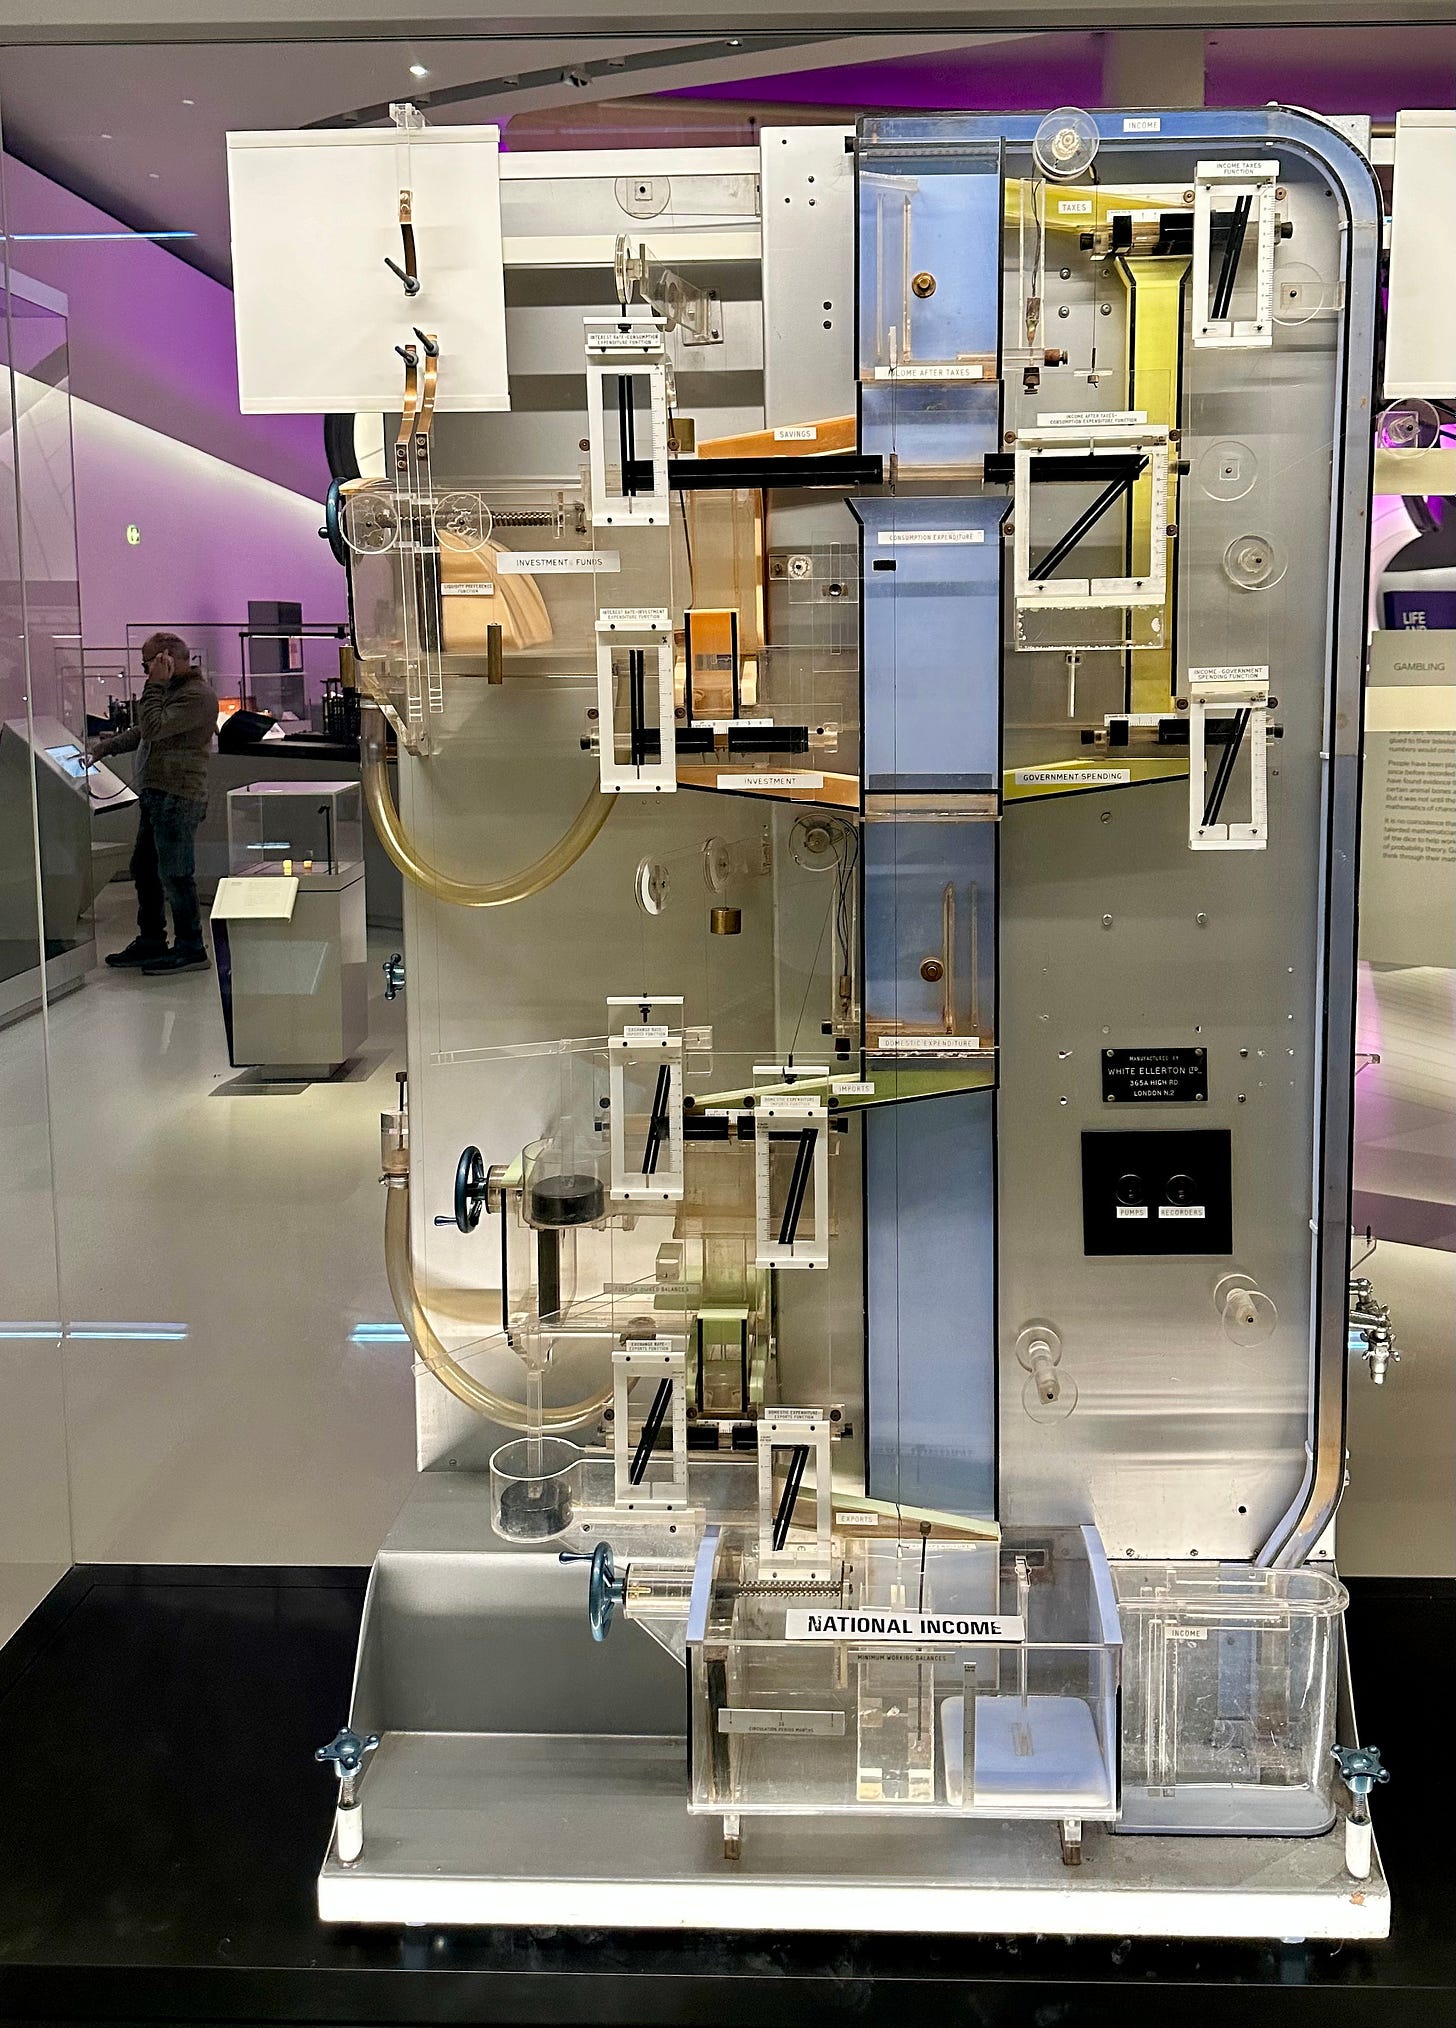 The Phillips machine, also known as the MONIAC (Monetary National Income Analogue Computer), an analogue computation device using water and tanks of varying size to model a holistic view of the British economy, taken at the Science Museum.